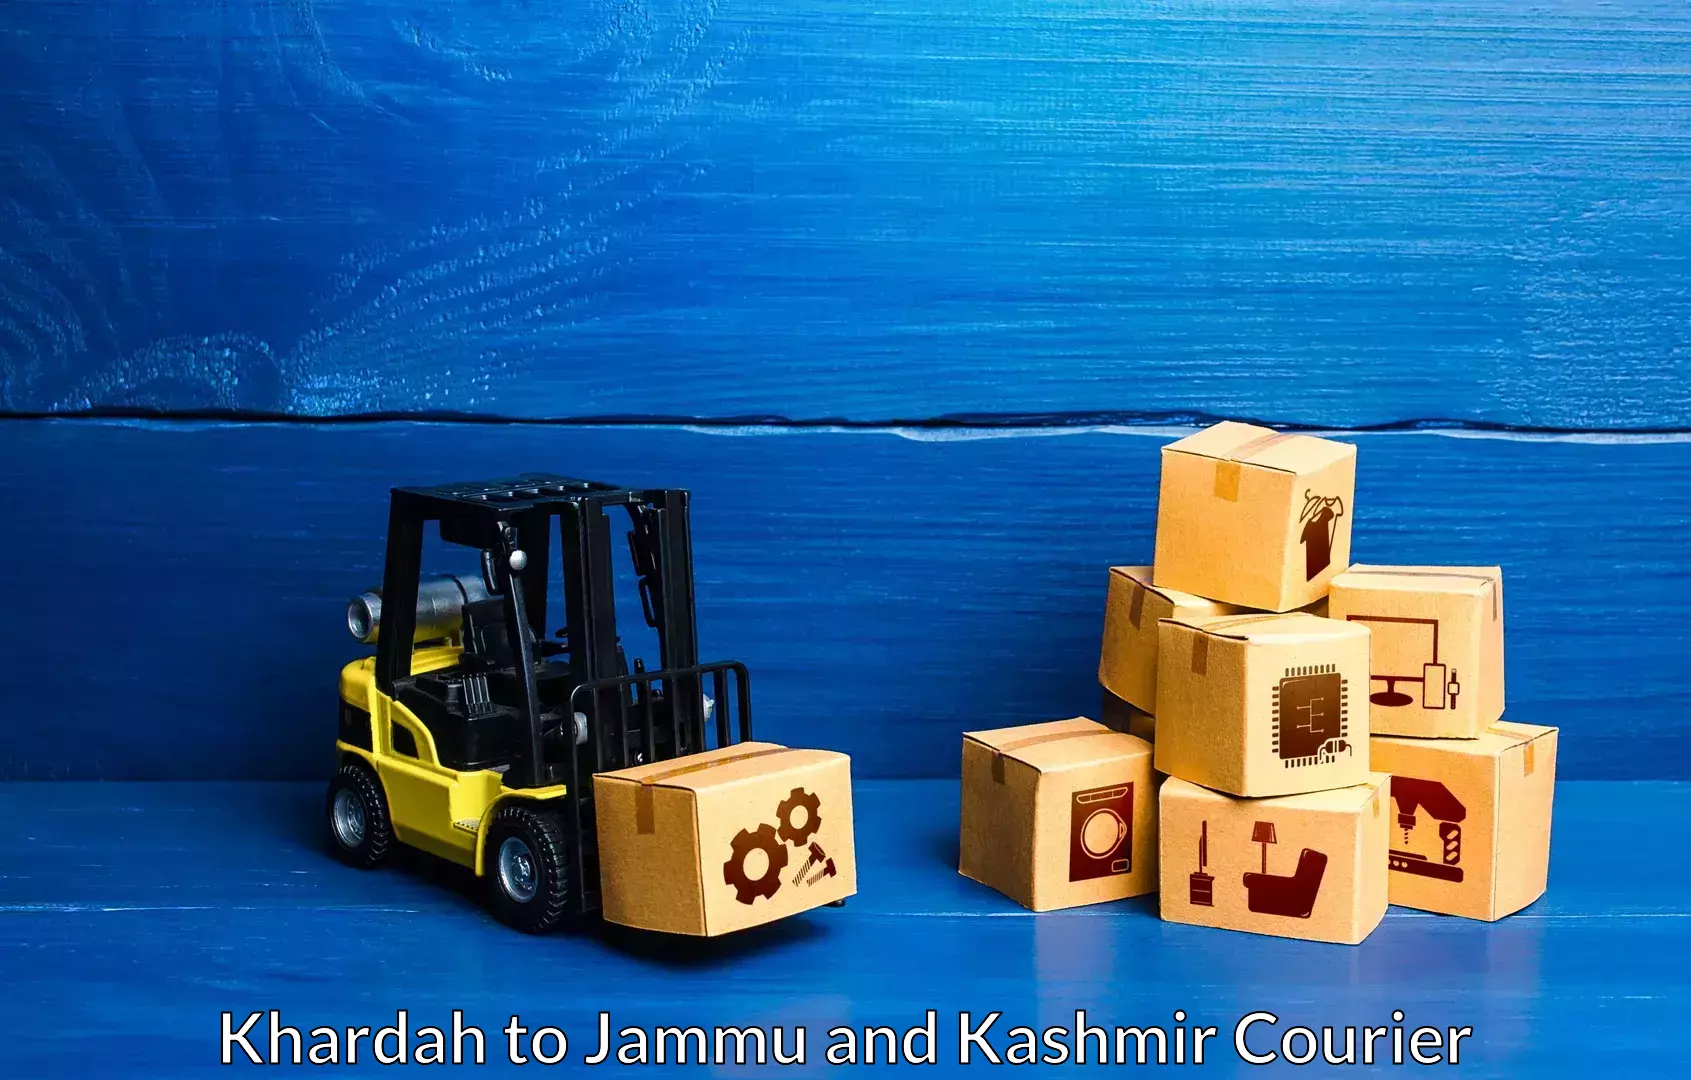 Furniture delivery service Khardah to Pulwama